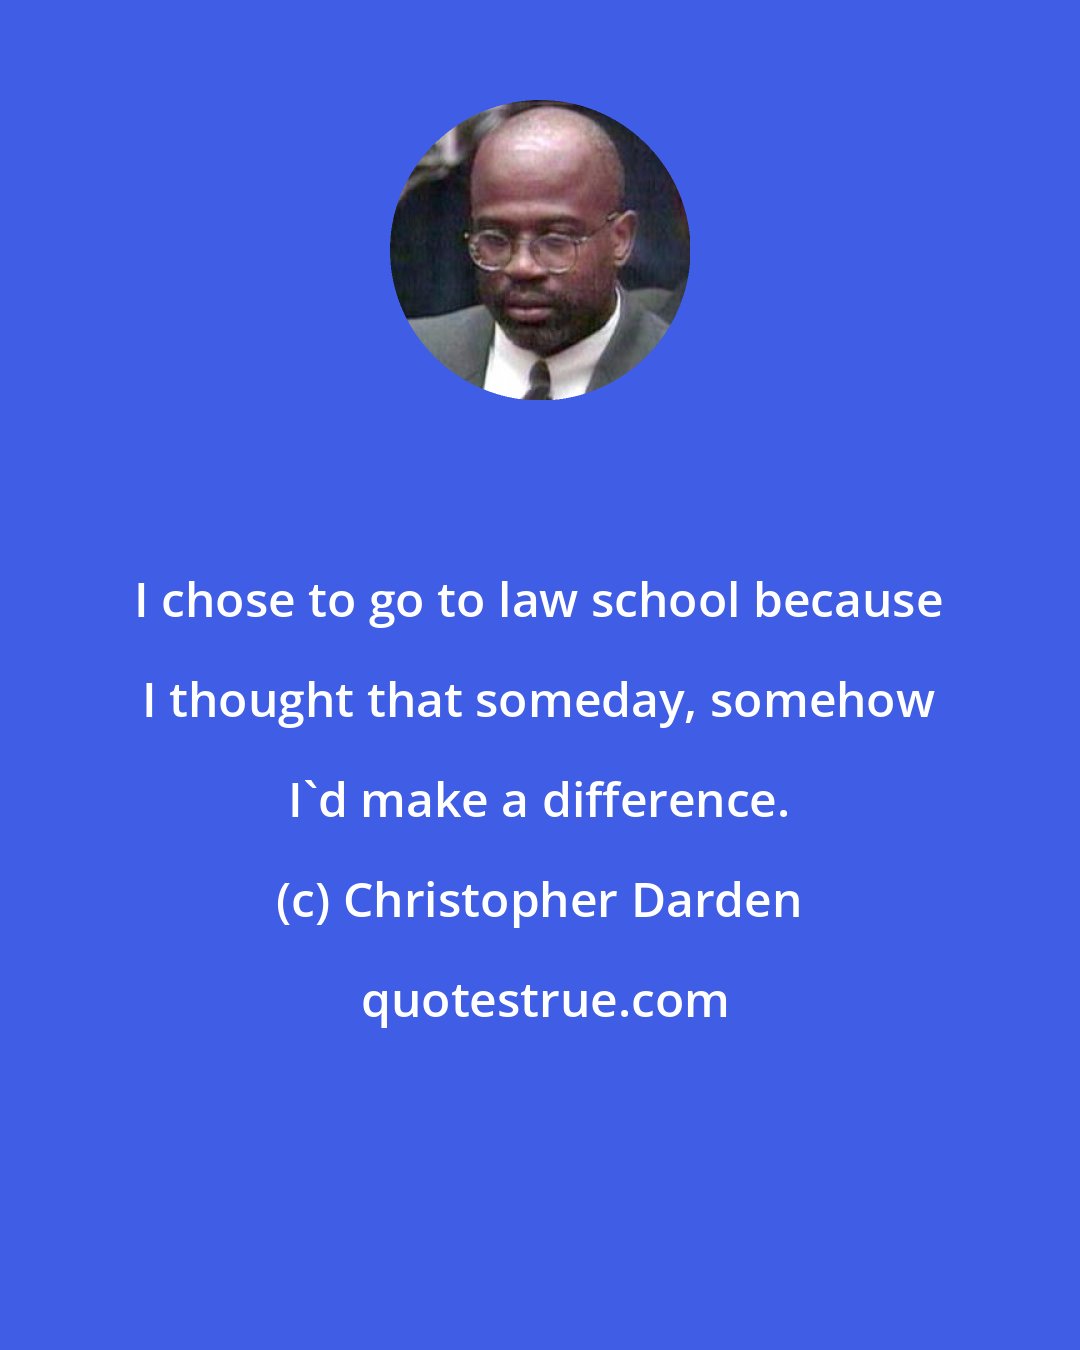 Christopher Darden: I chose to go to law school because I thought that someday, somehow I'd make a difference.